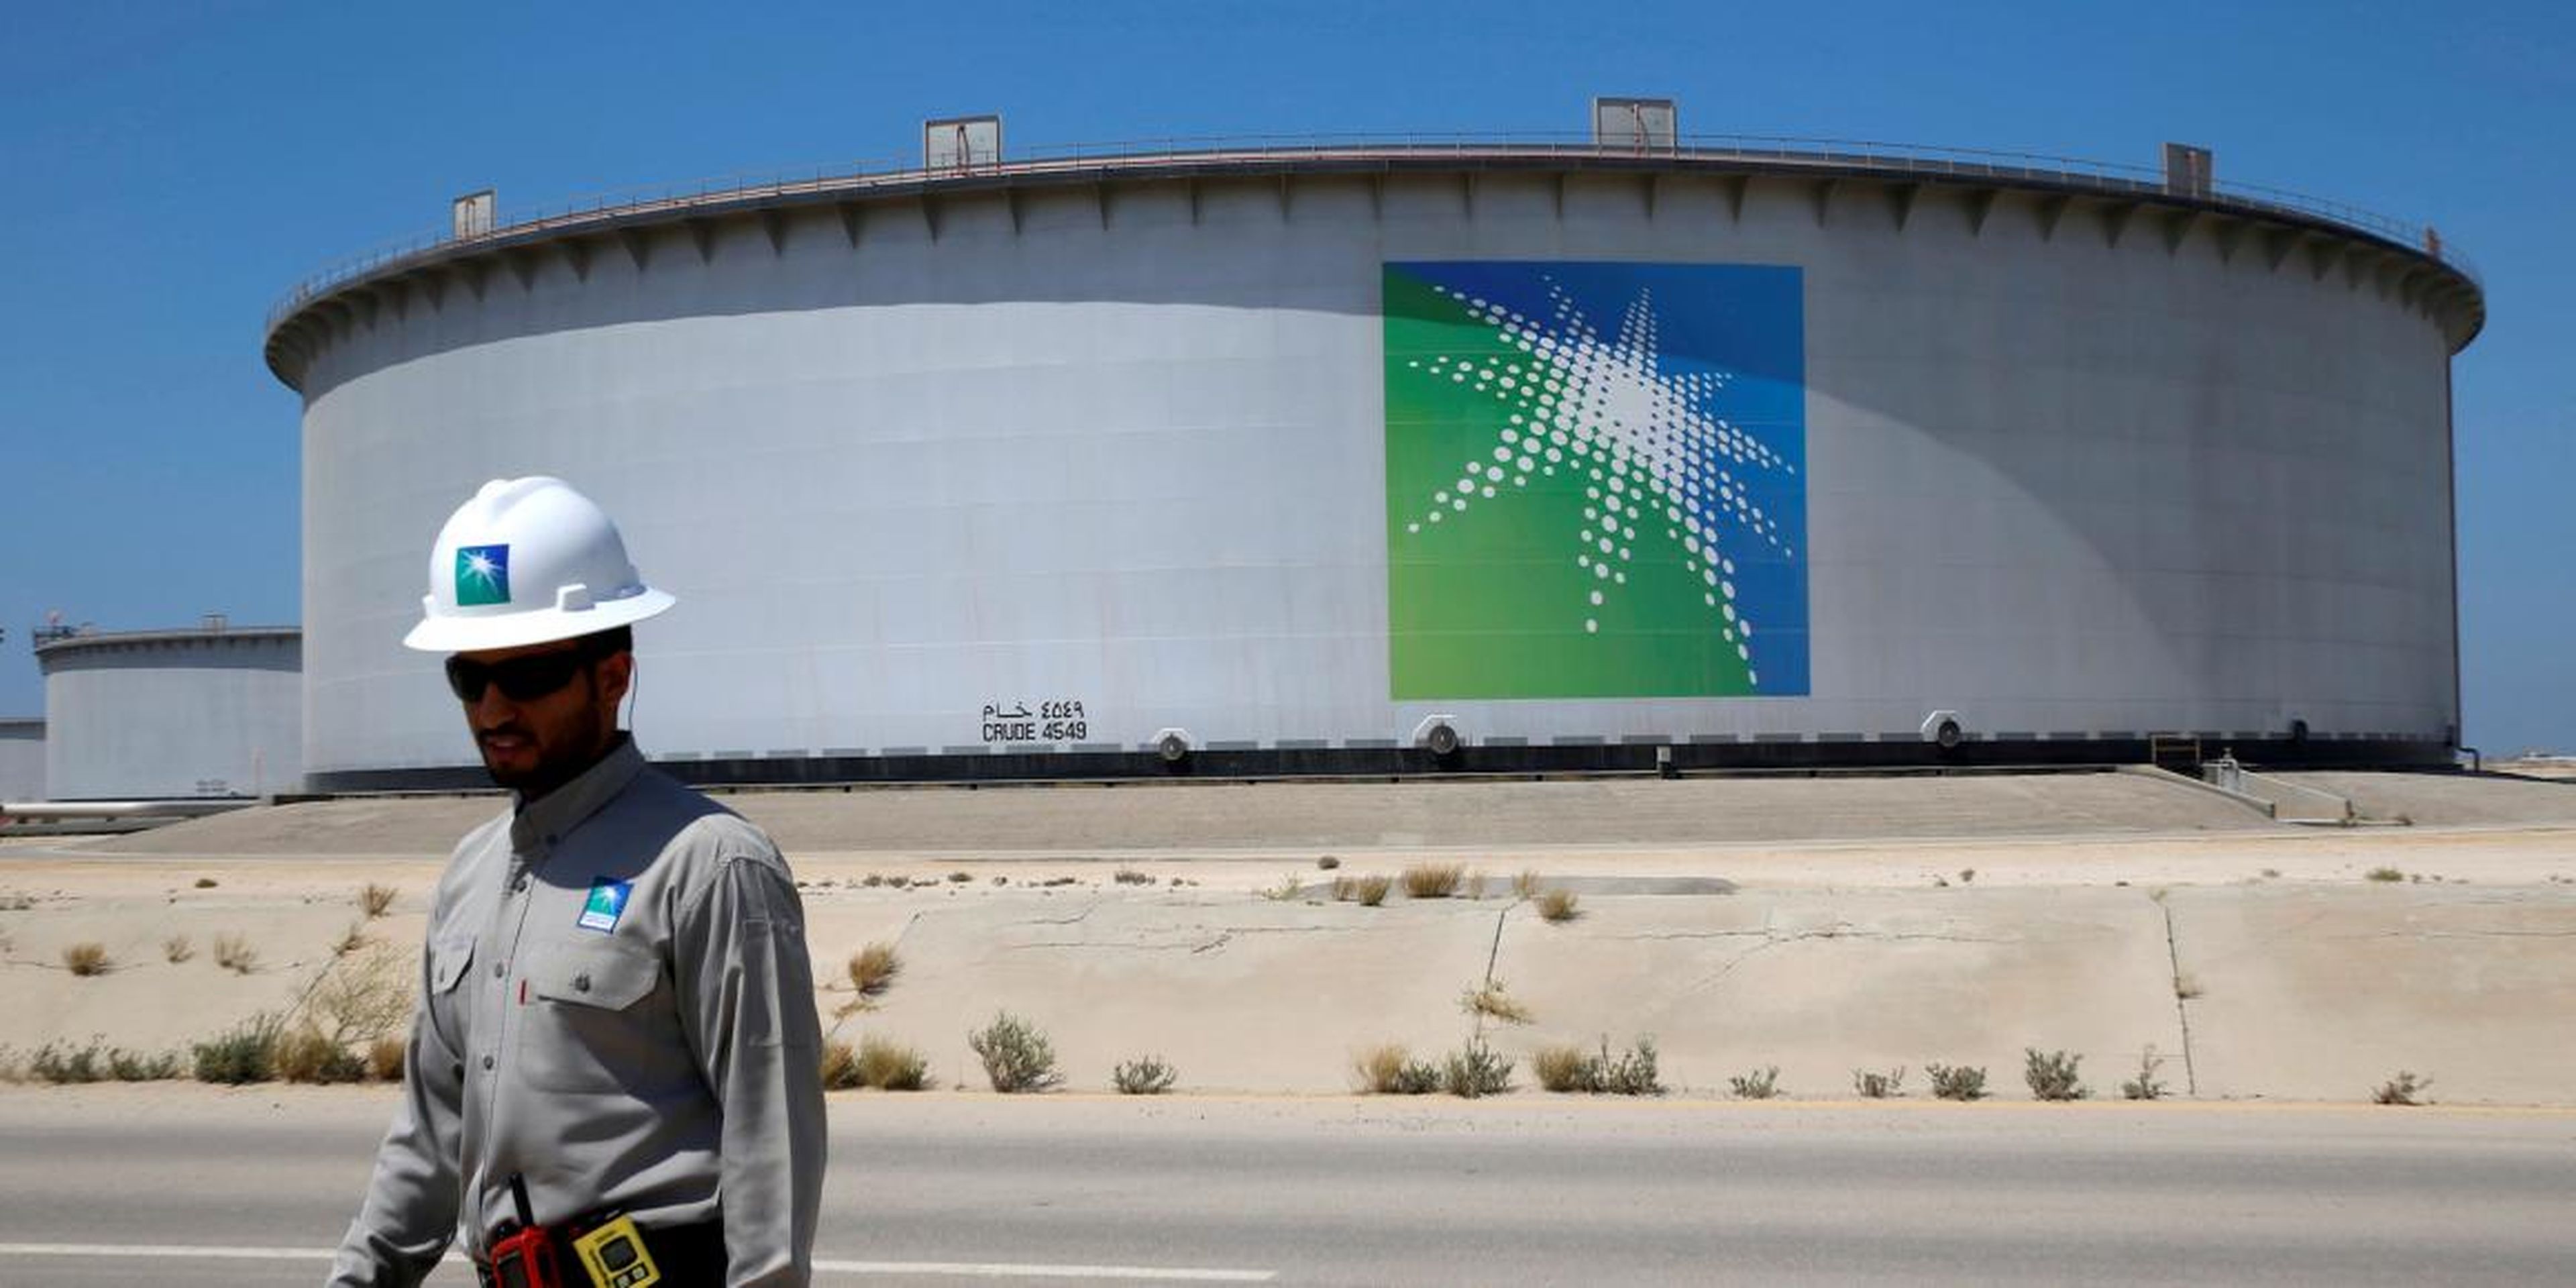 Saudi Aramco is gearing up for what could be the largest IPO ever. Here are 10 public offerings its massive listing would dwarf.